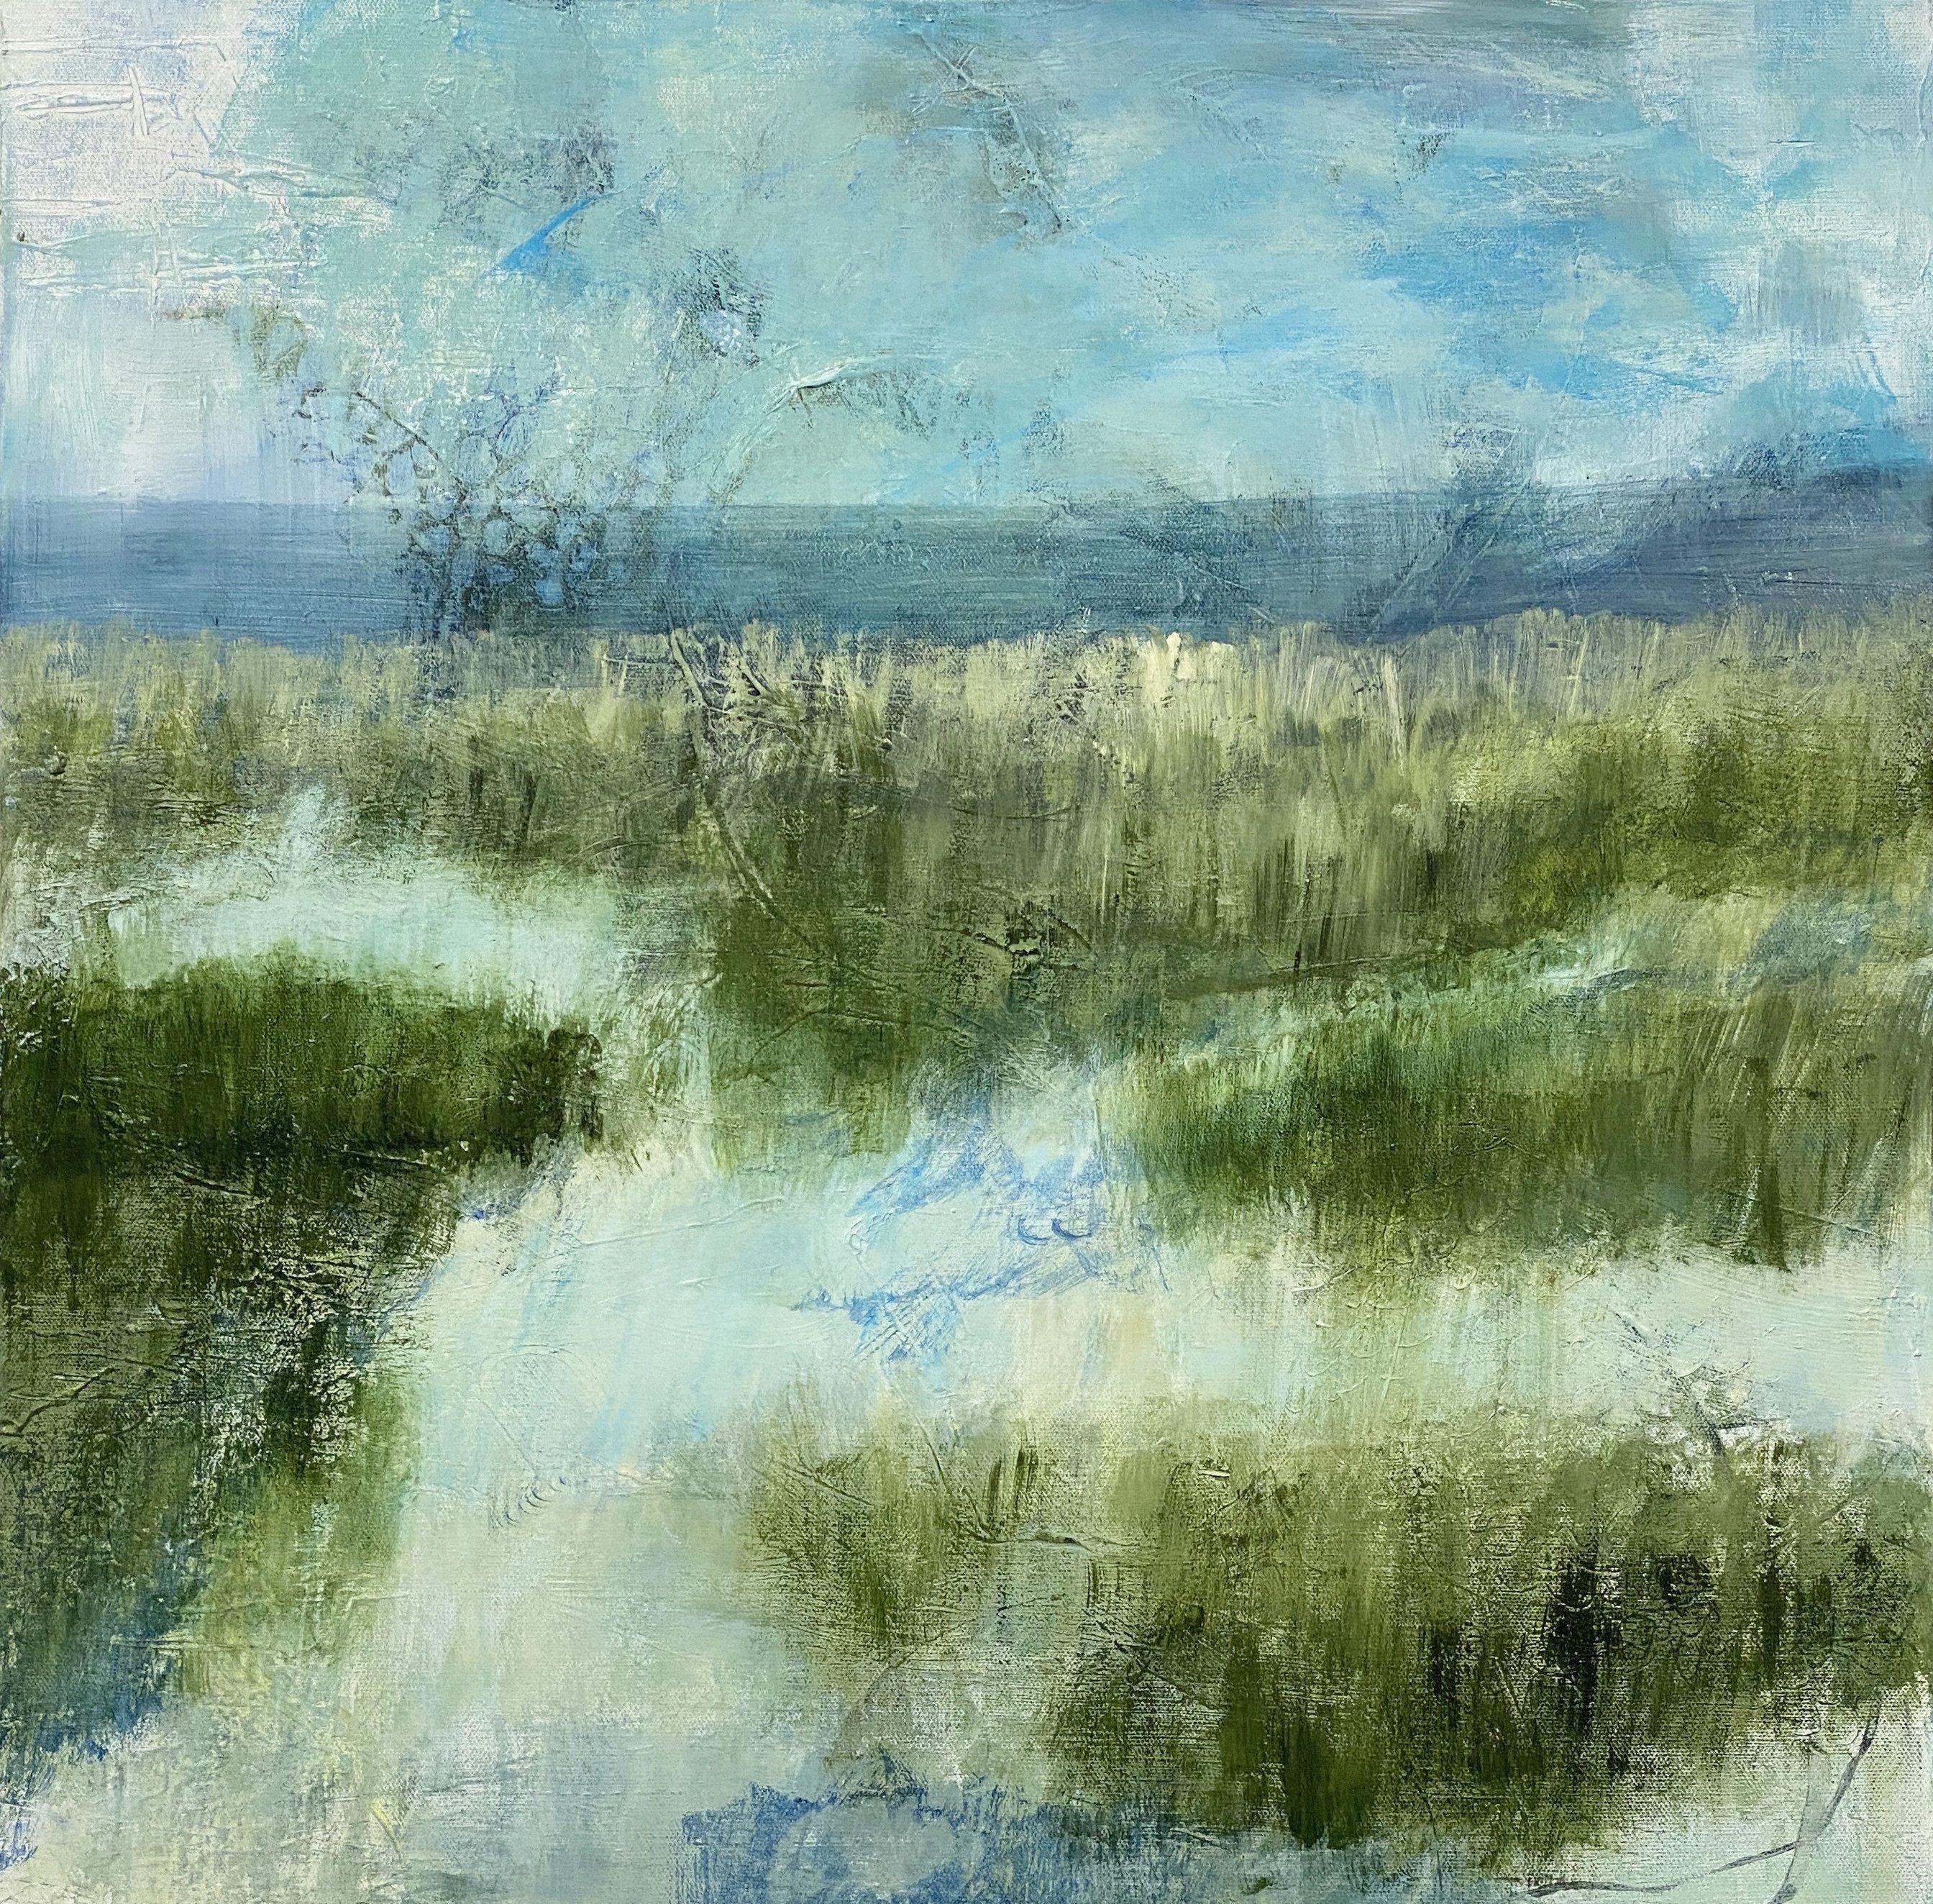 Juanita Bellavance  Landscape Painting - Where the marshes run low, abstract landscape, green and blue. Marshes